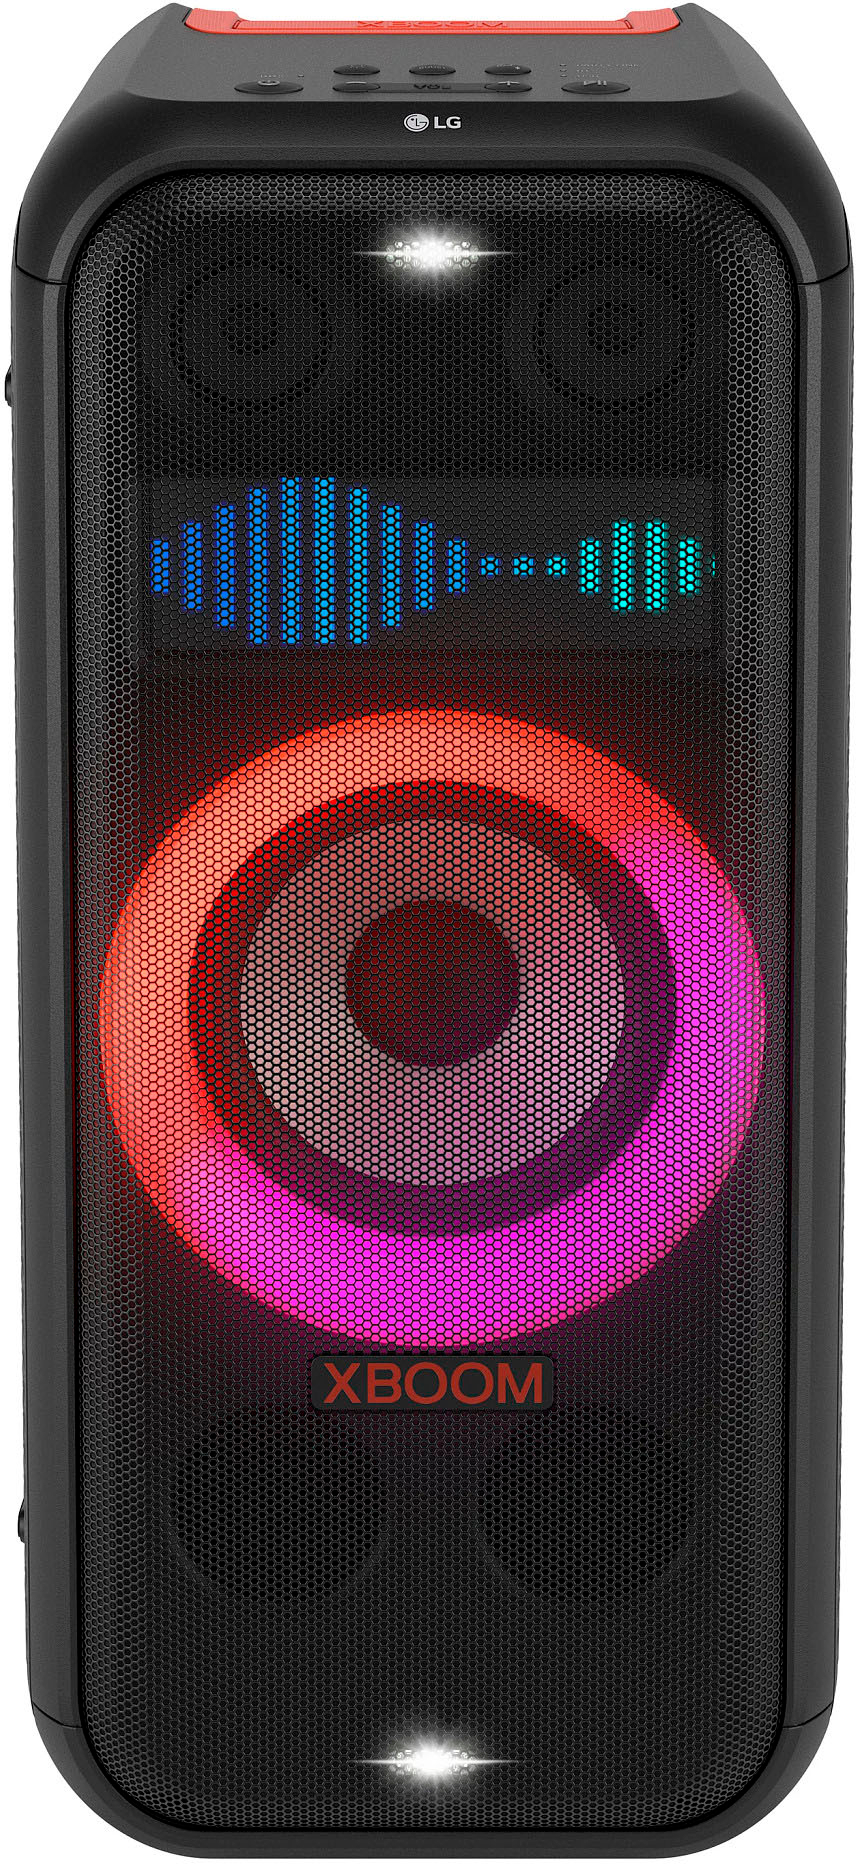 LG XBOOM Buy XL7S Portable Party Pixel Black with Best Speaker XL7 LED - Tower